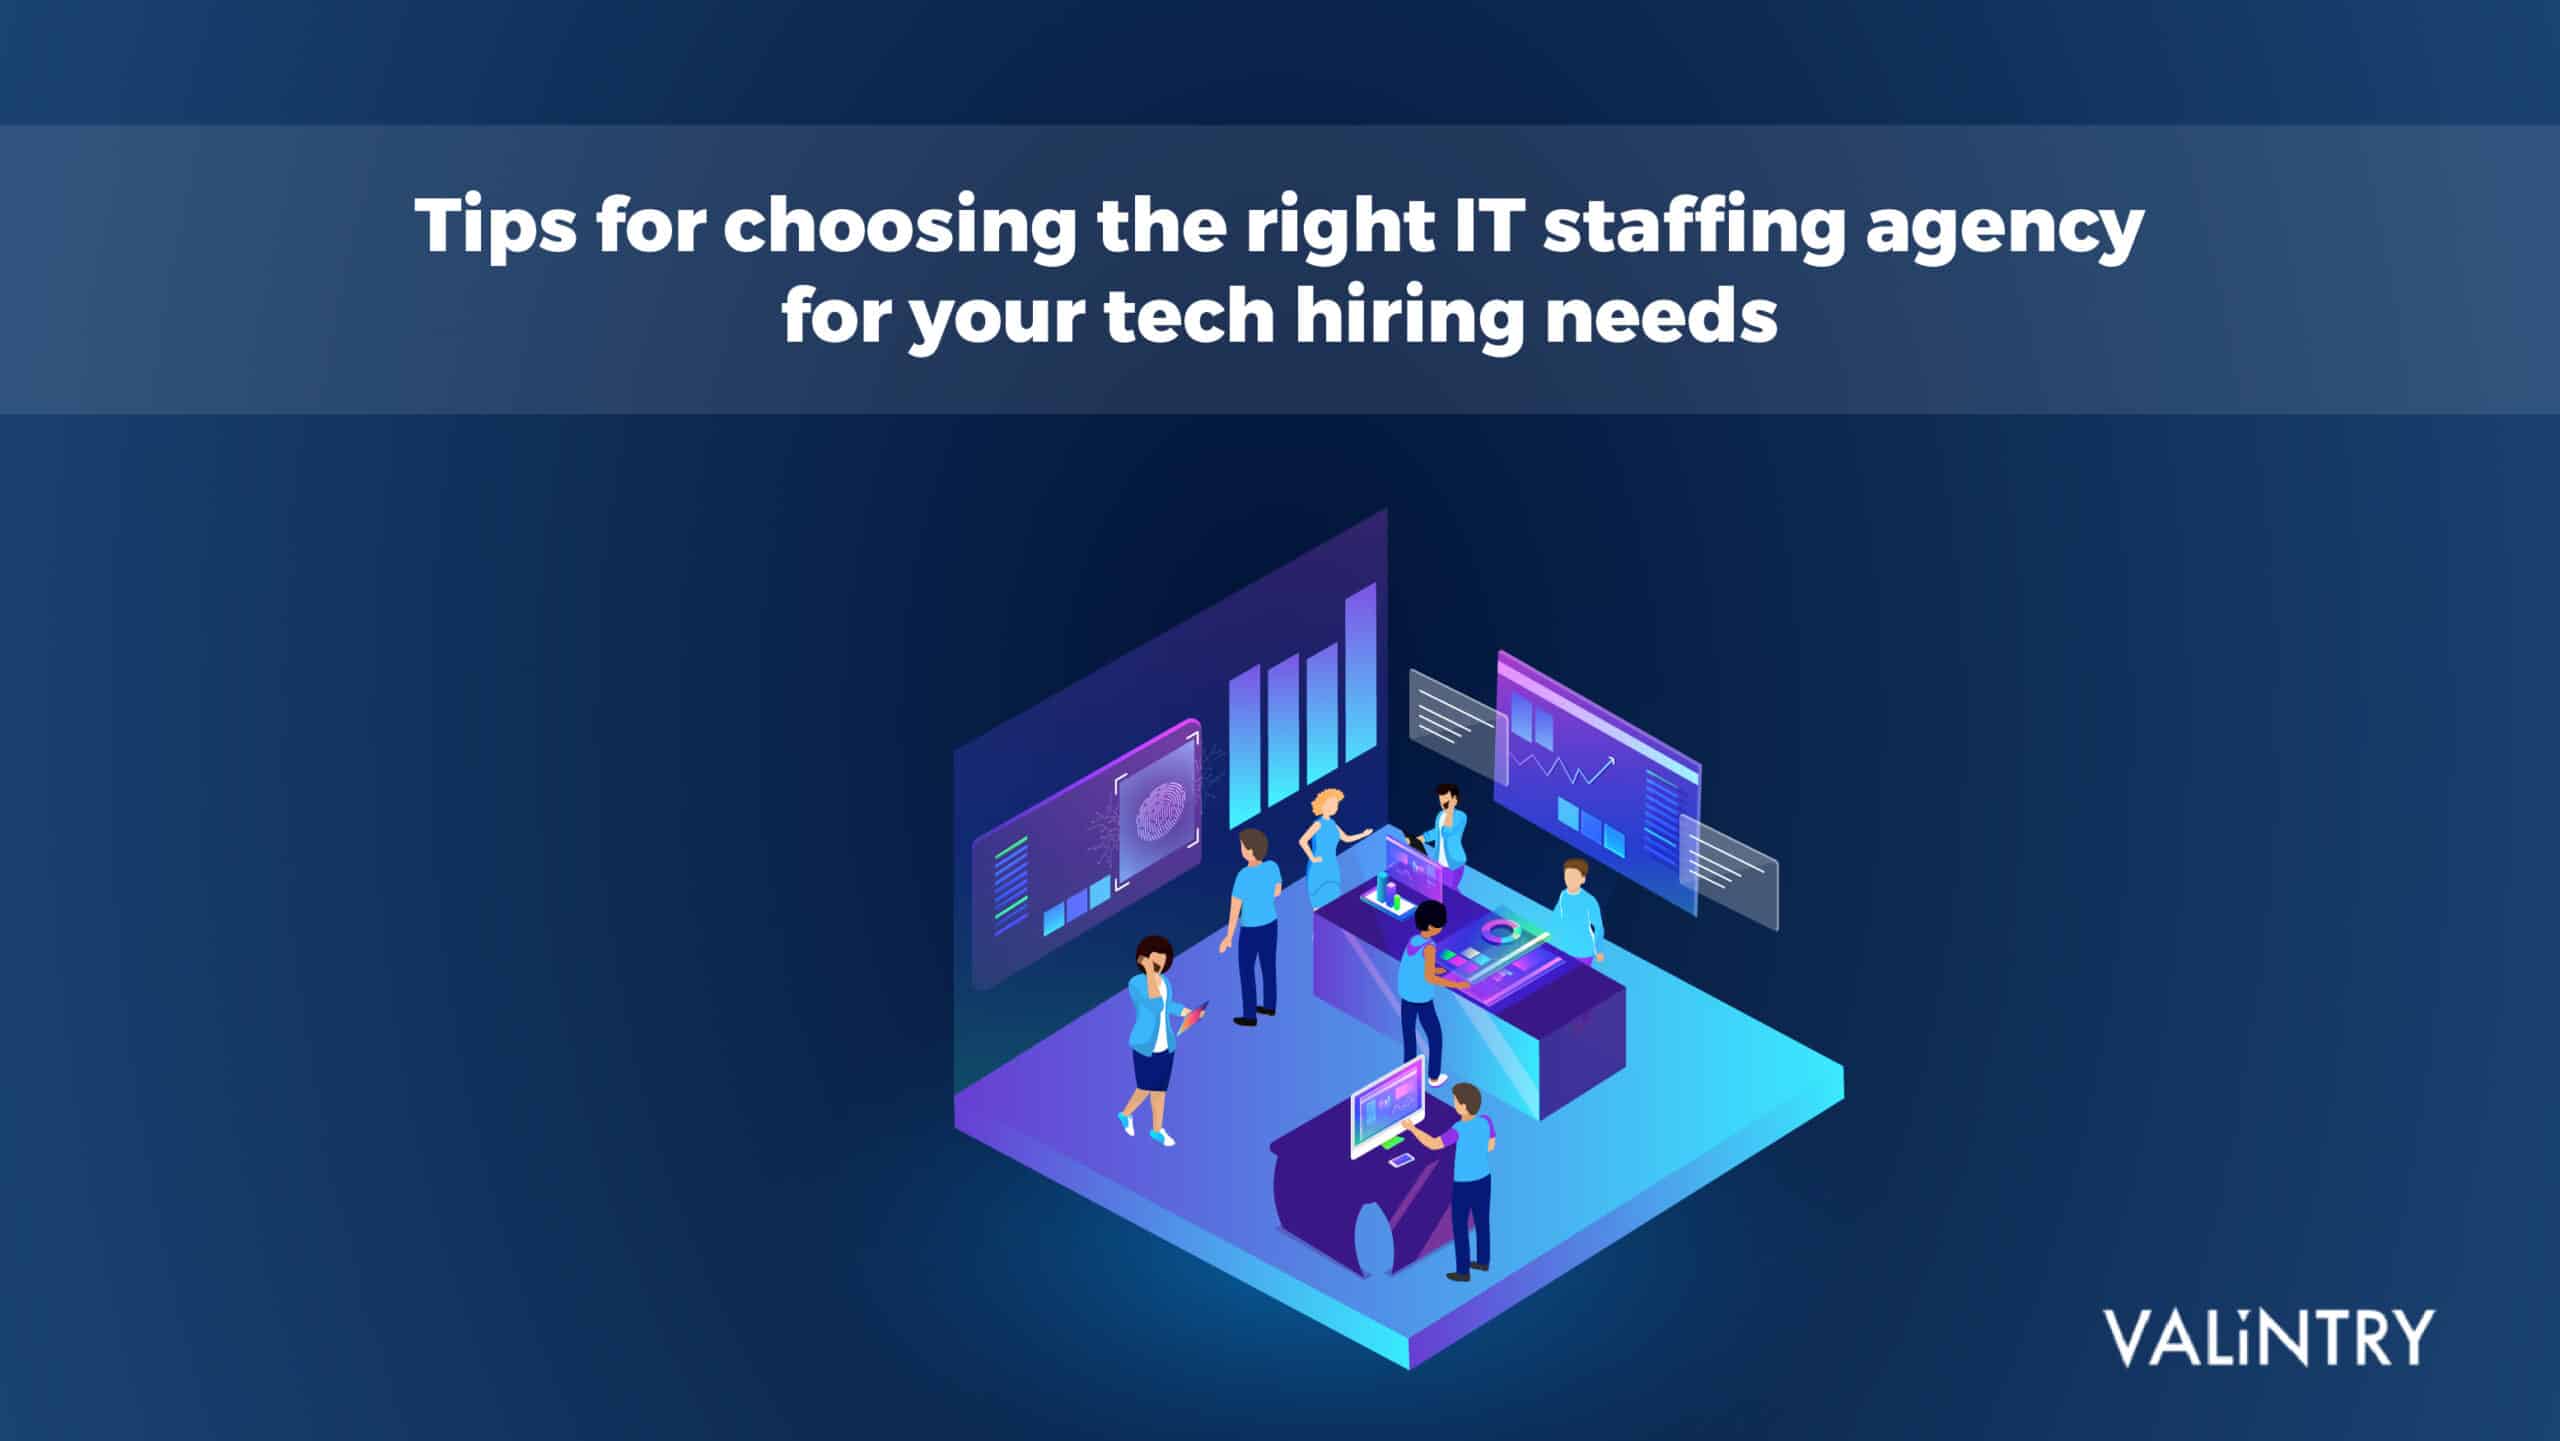 Tips for Choosing the Right IT Staffing Agency for Your Tech Hiring Needs